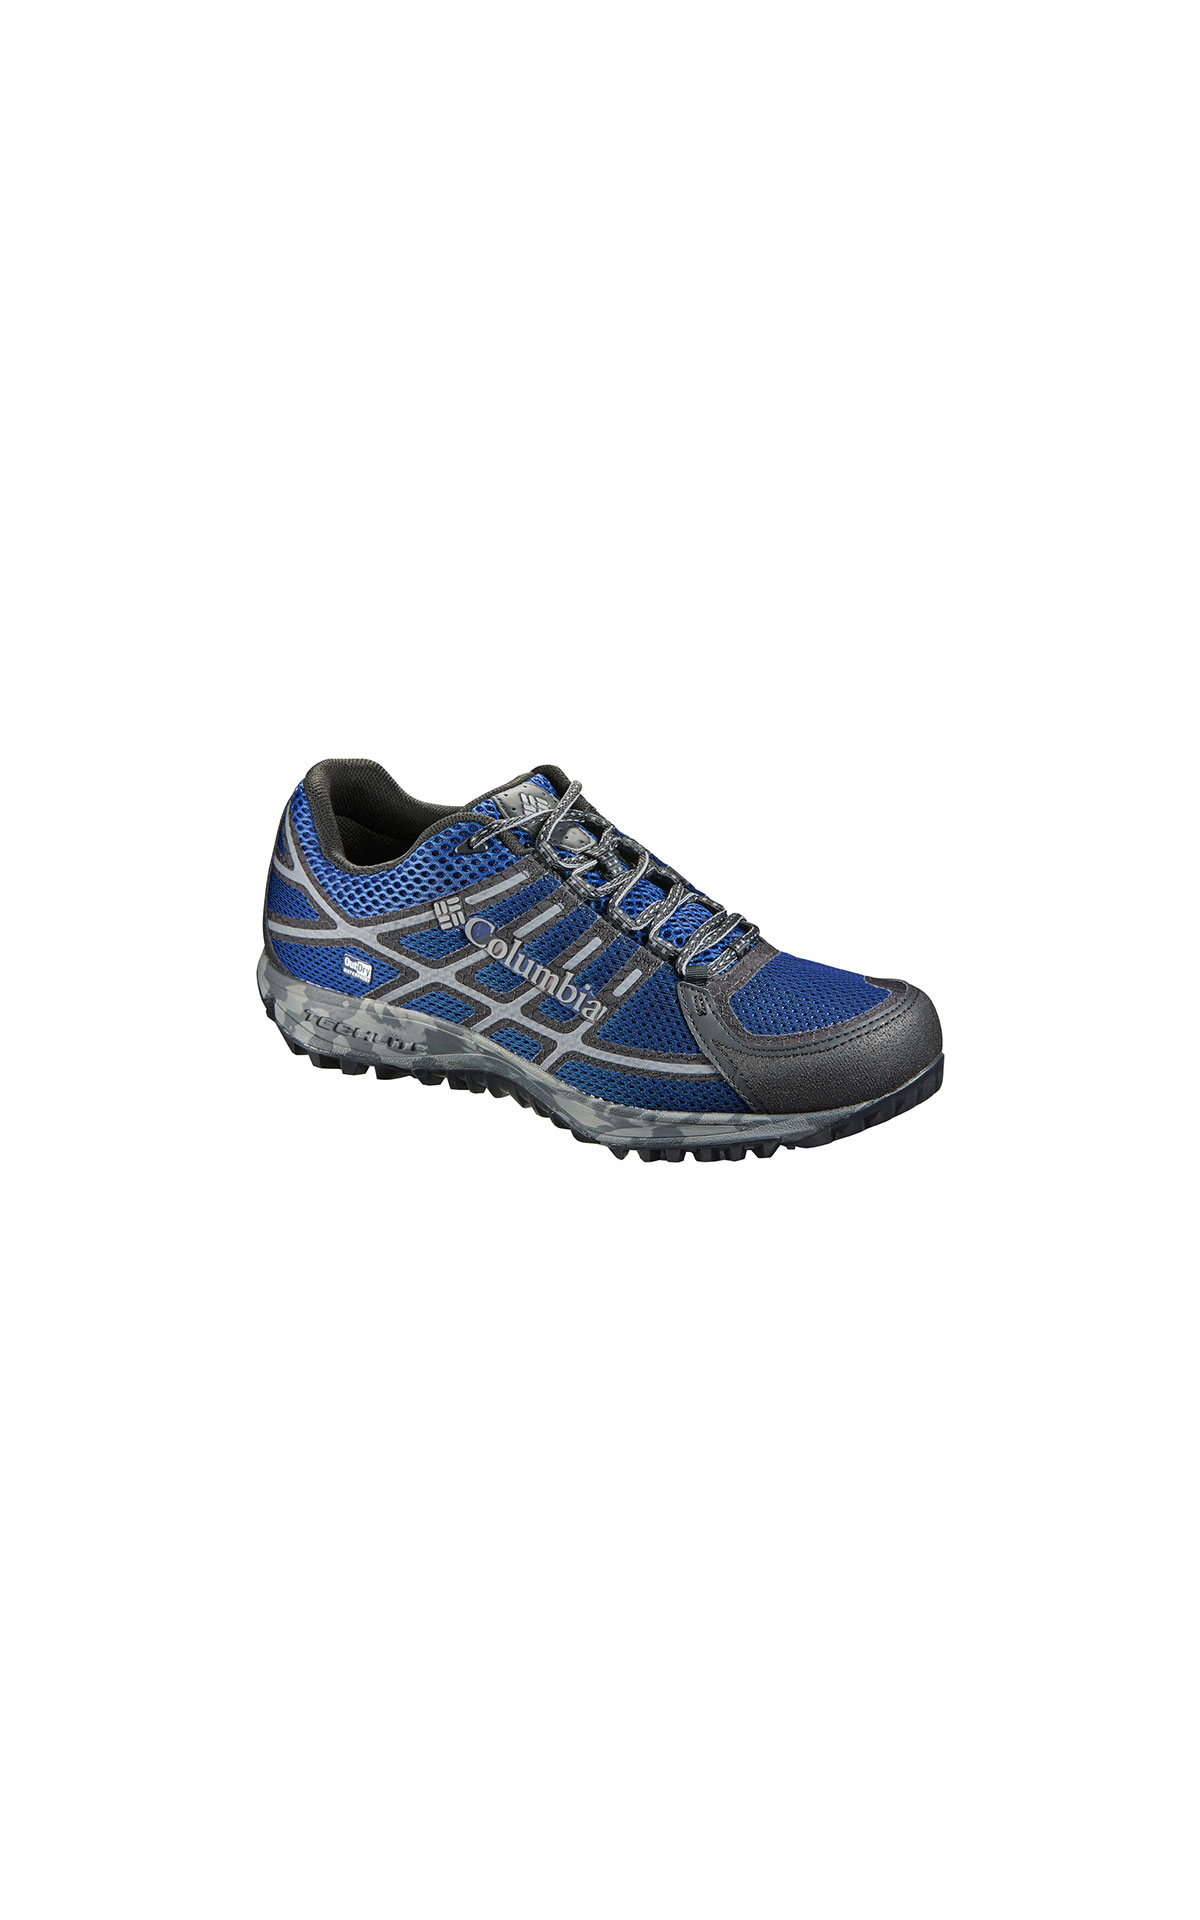 columbia junction hollow outdry shoes